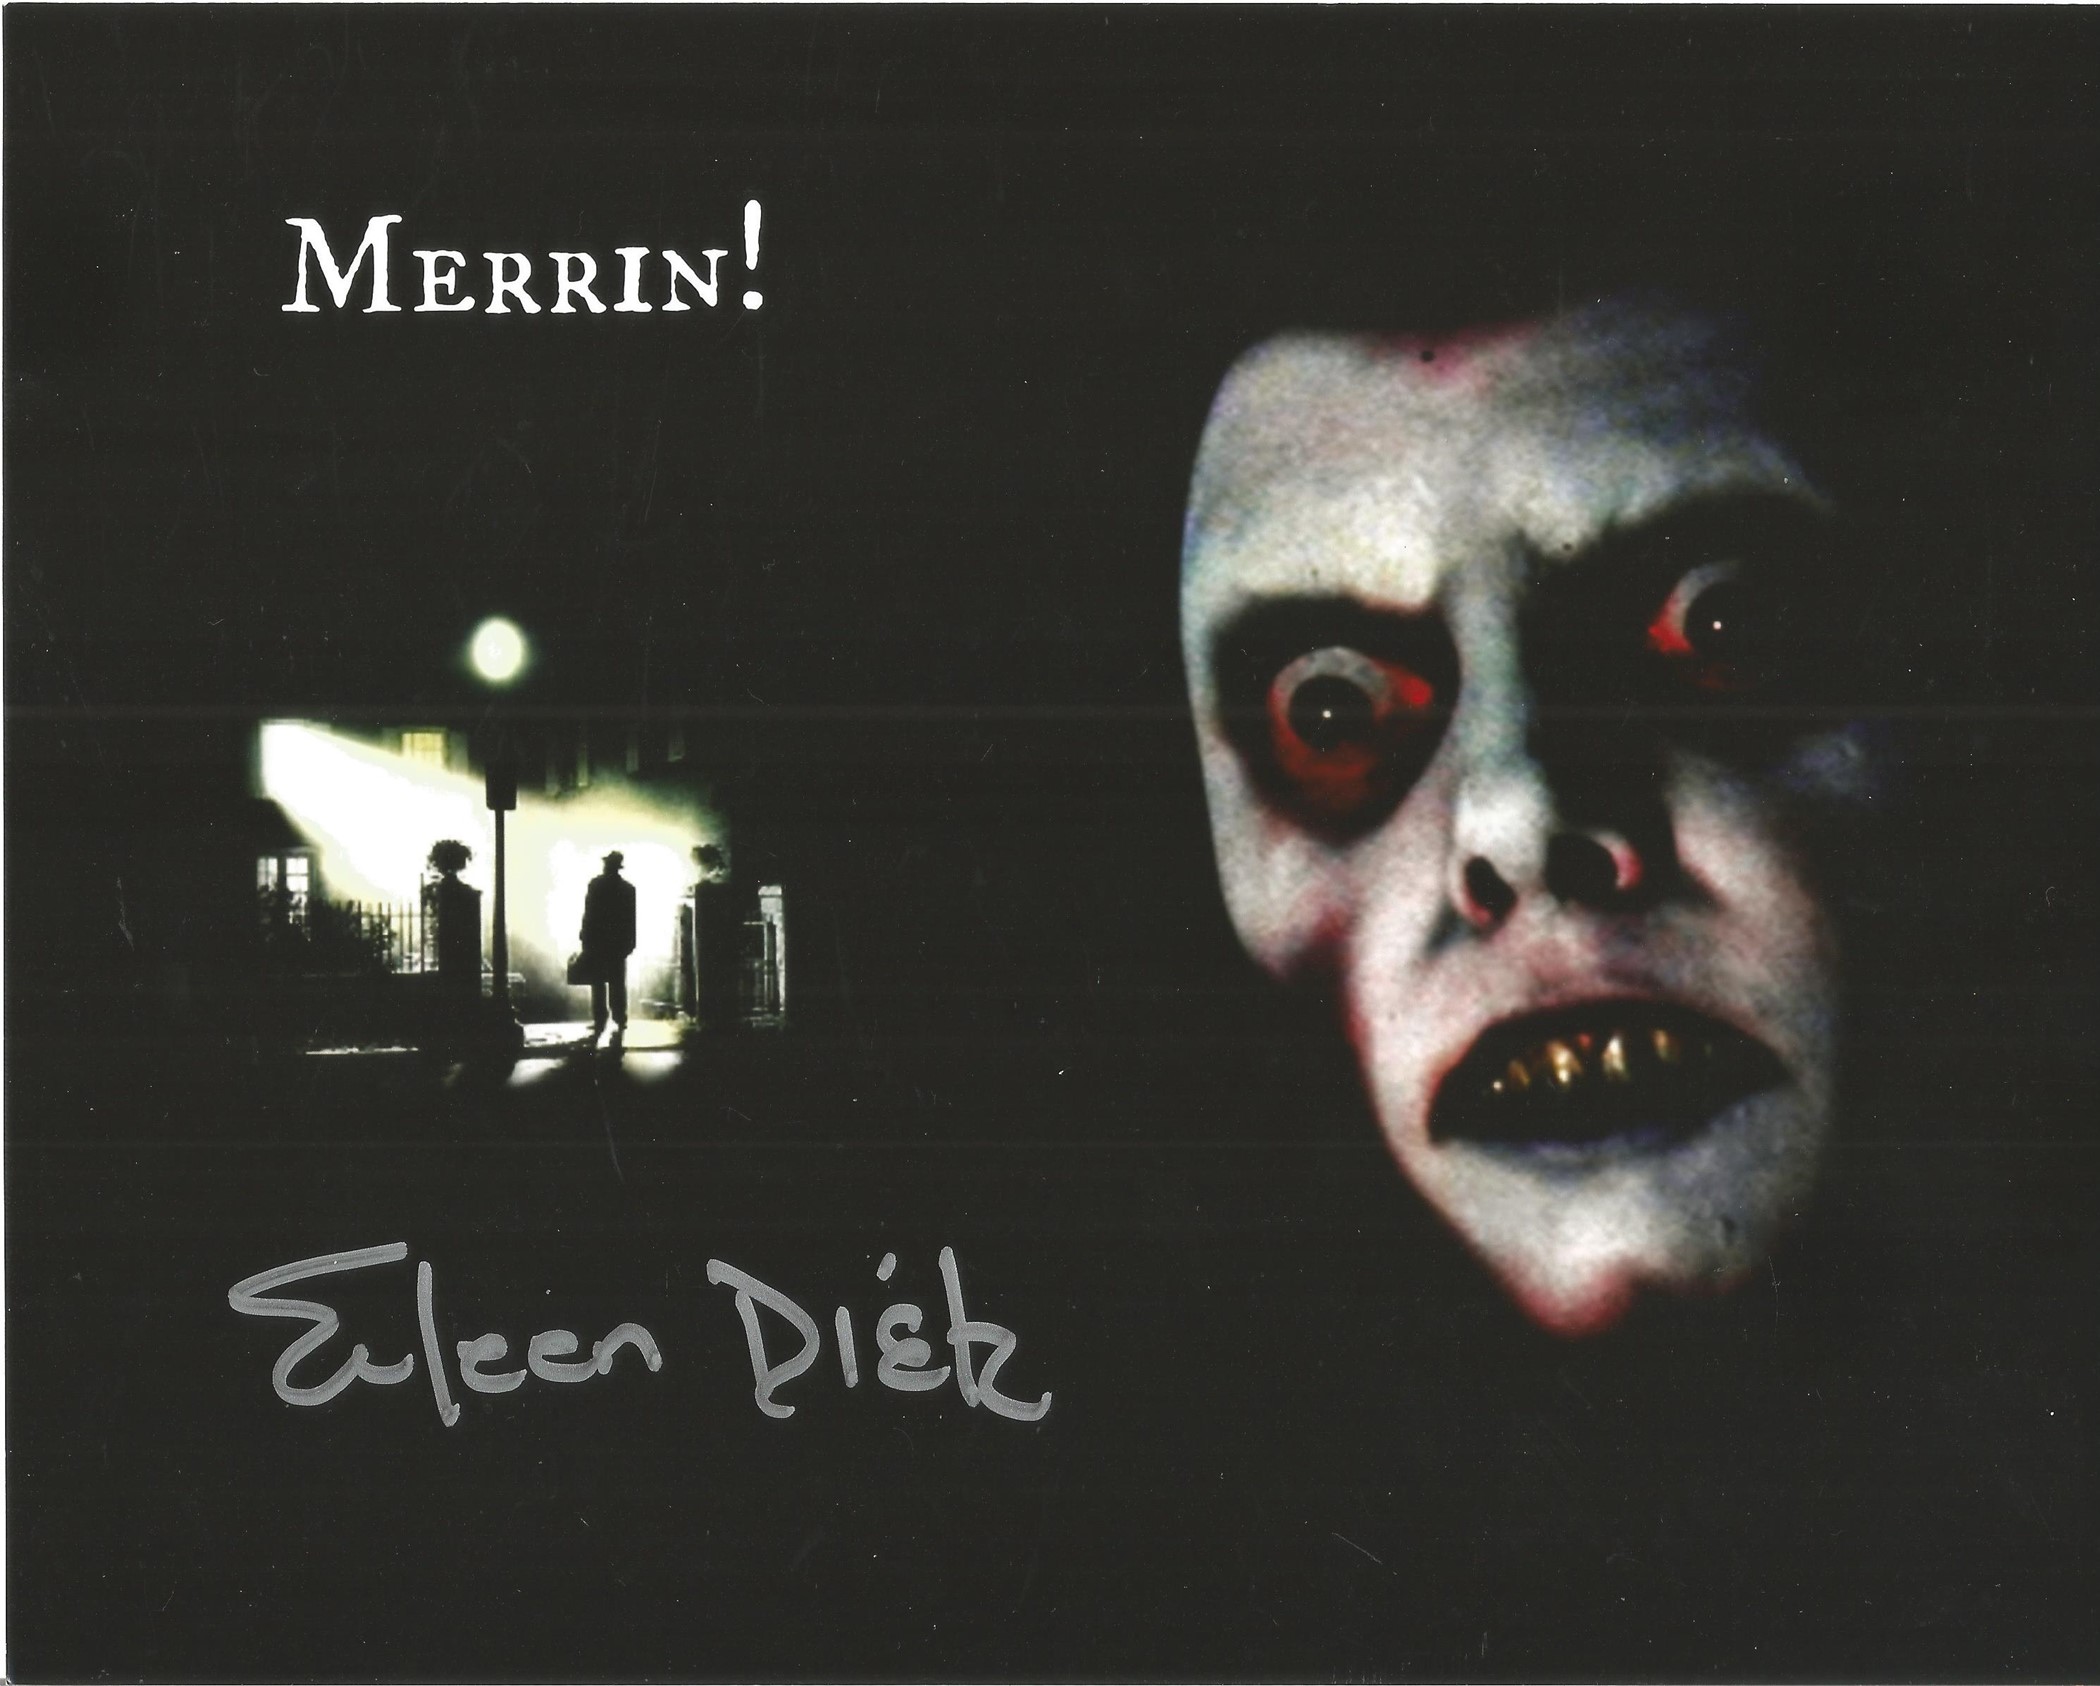 Eileen Dietz signed 10 x 8 inch colour promo photograph taken from the 1973 film The Exorcist.